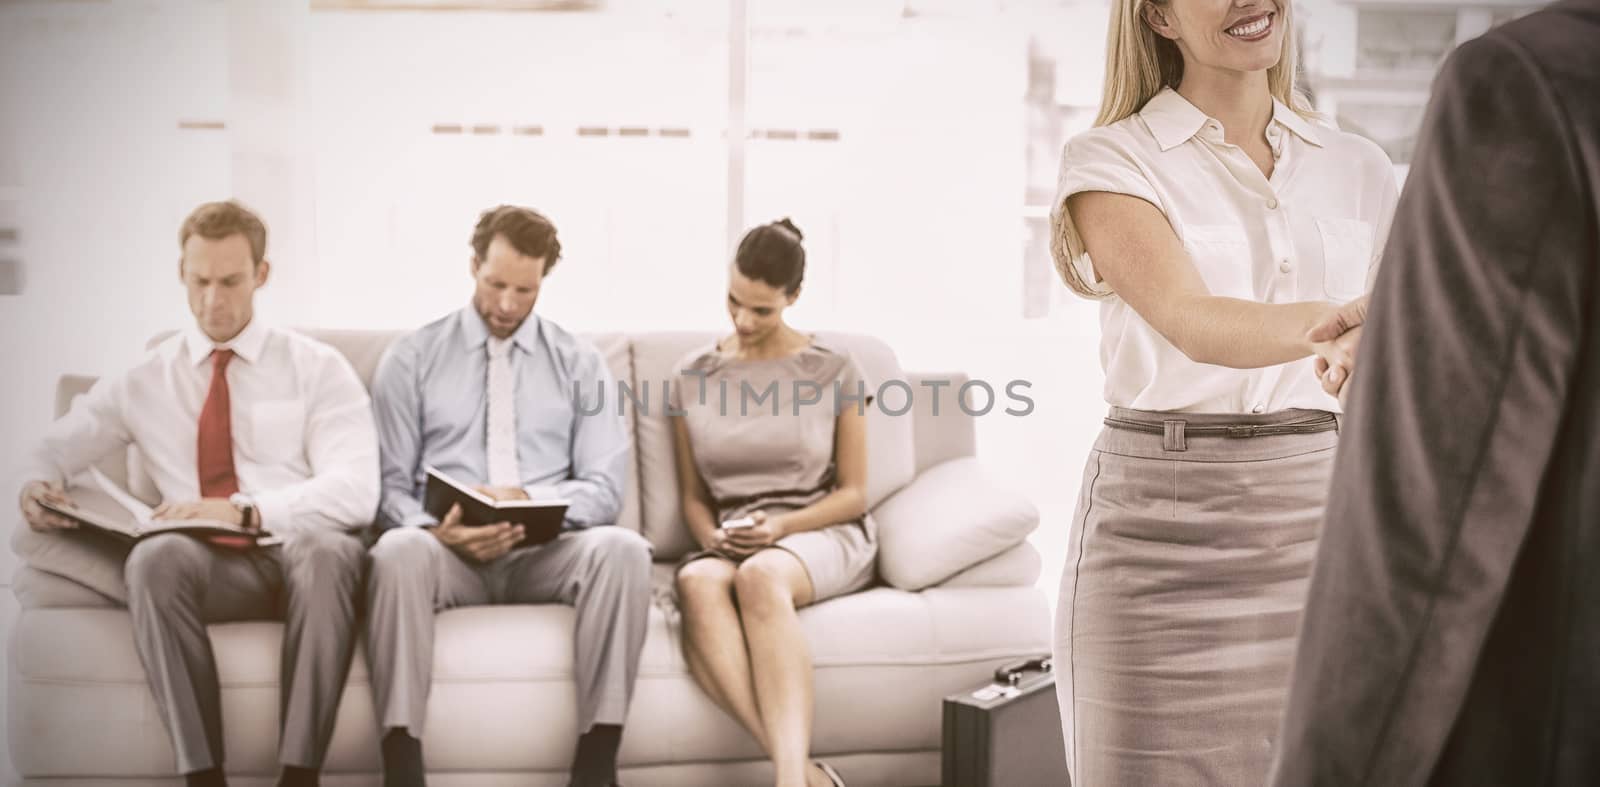 Businessman shaking hands with woman besides people waiting for job interview in office